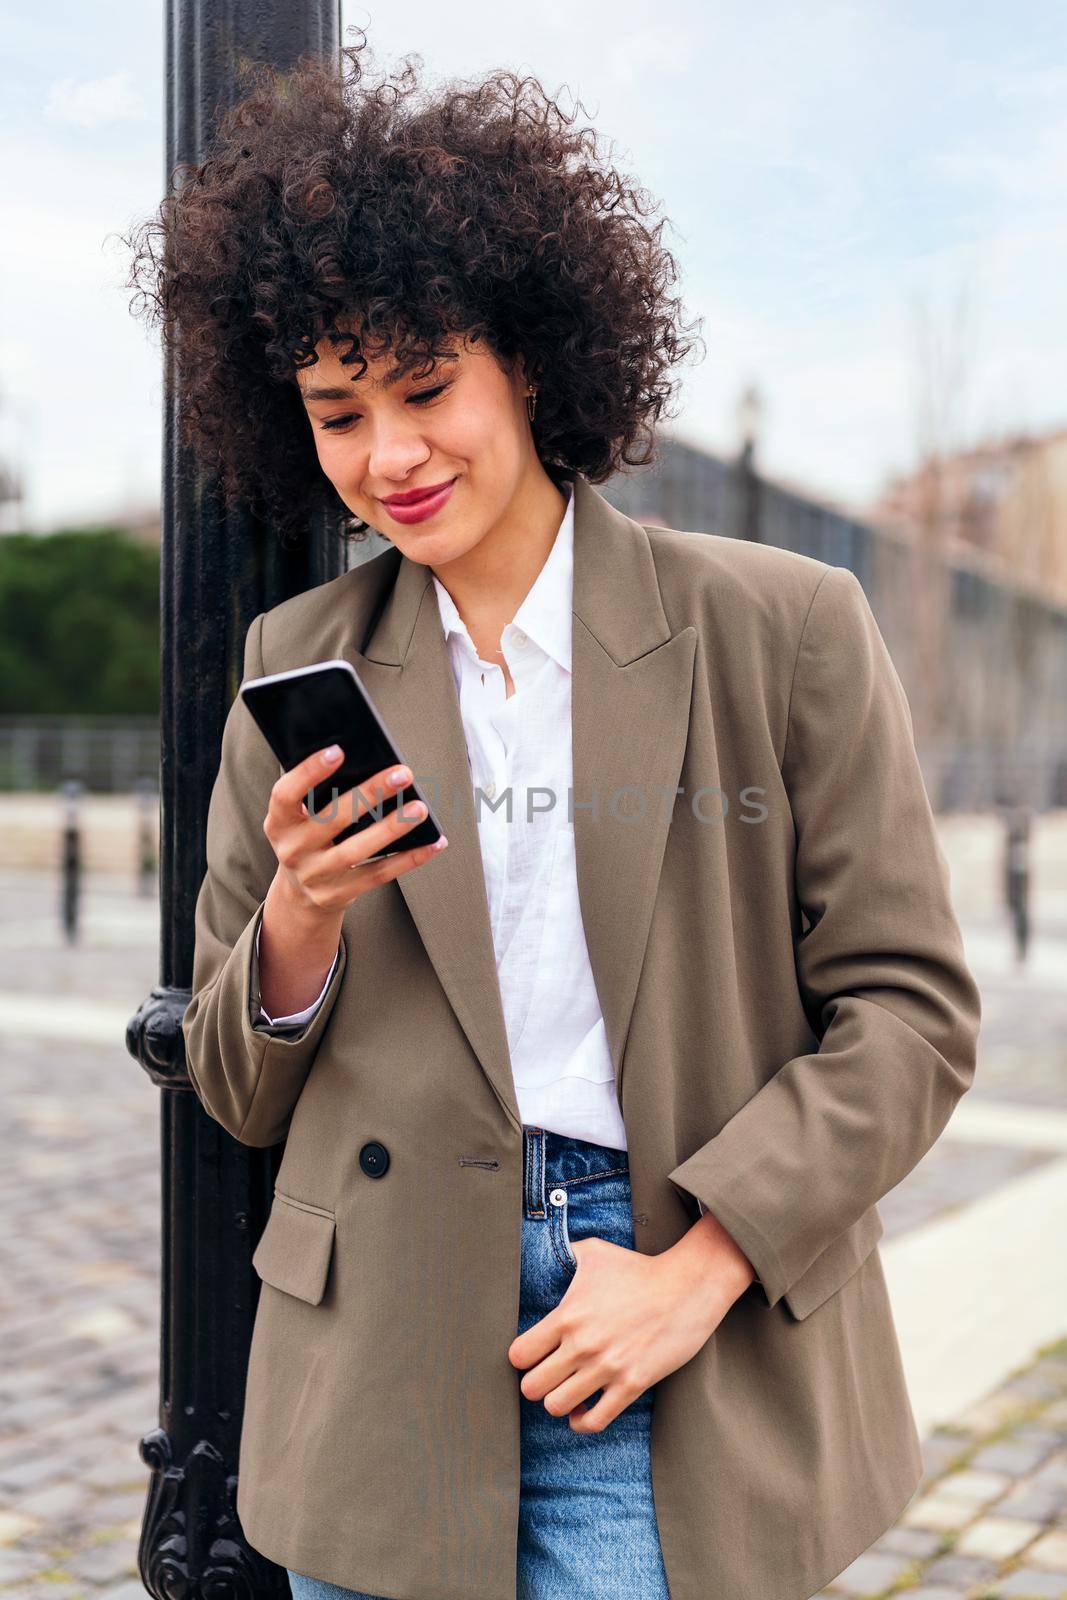 portrait of a smiling young latin woman checking her phone leaning against a city lamppost, technology and communication concept